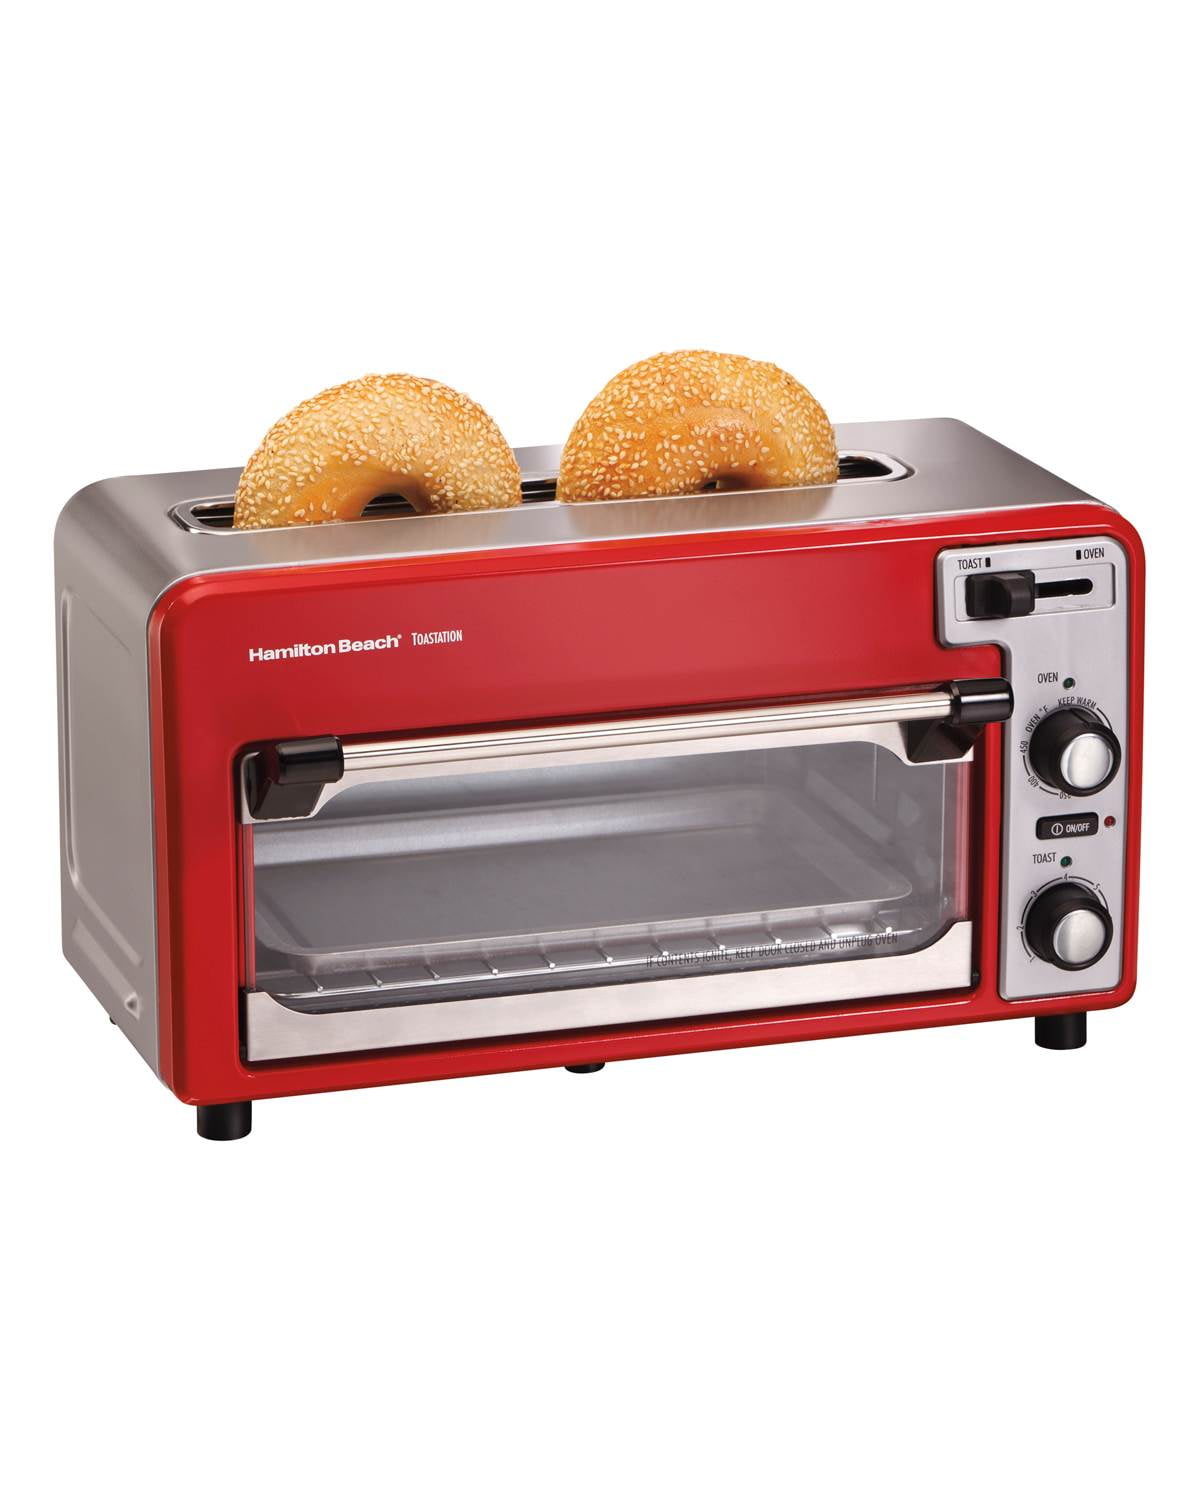 Toastation Toaster Oven Toaster & Oven Combination Fast More Cooking Less Space 